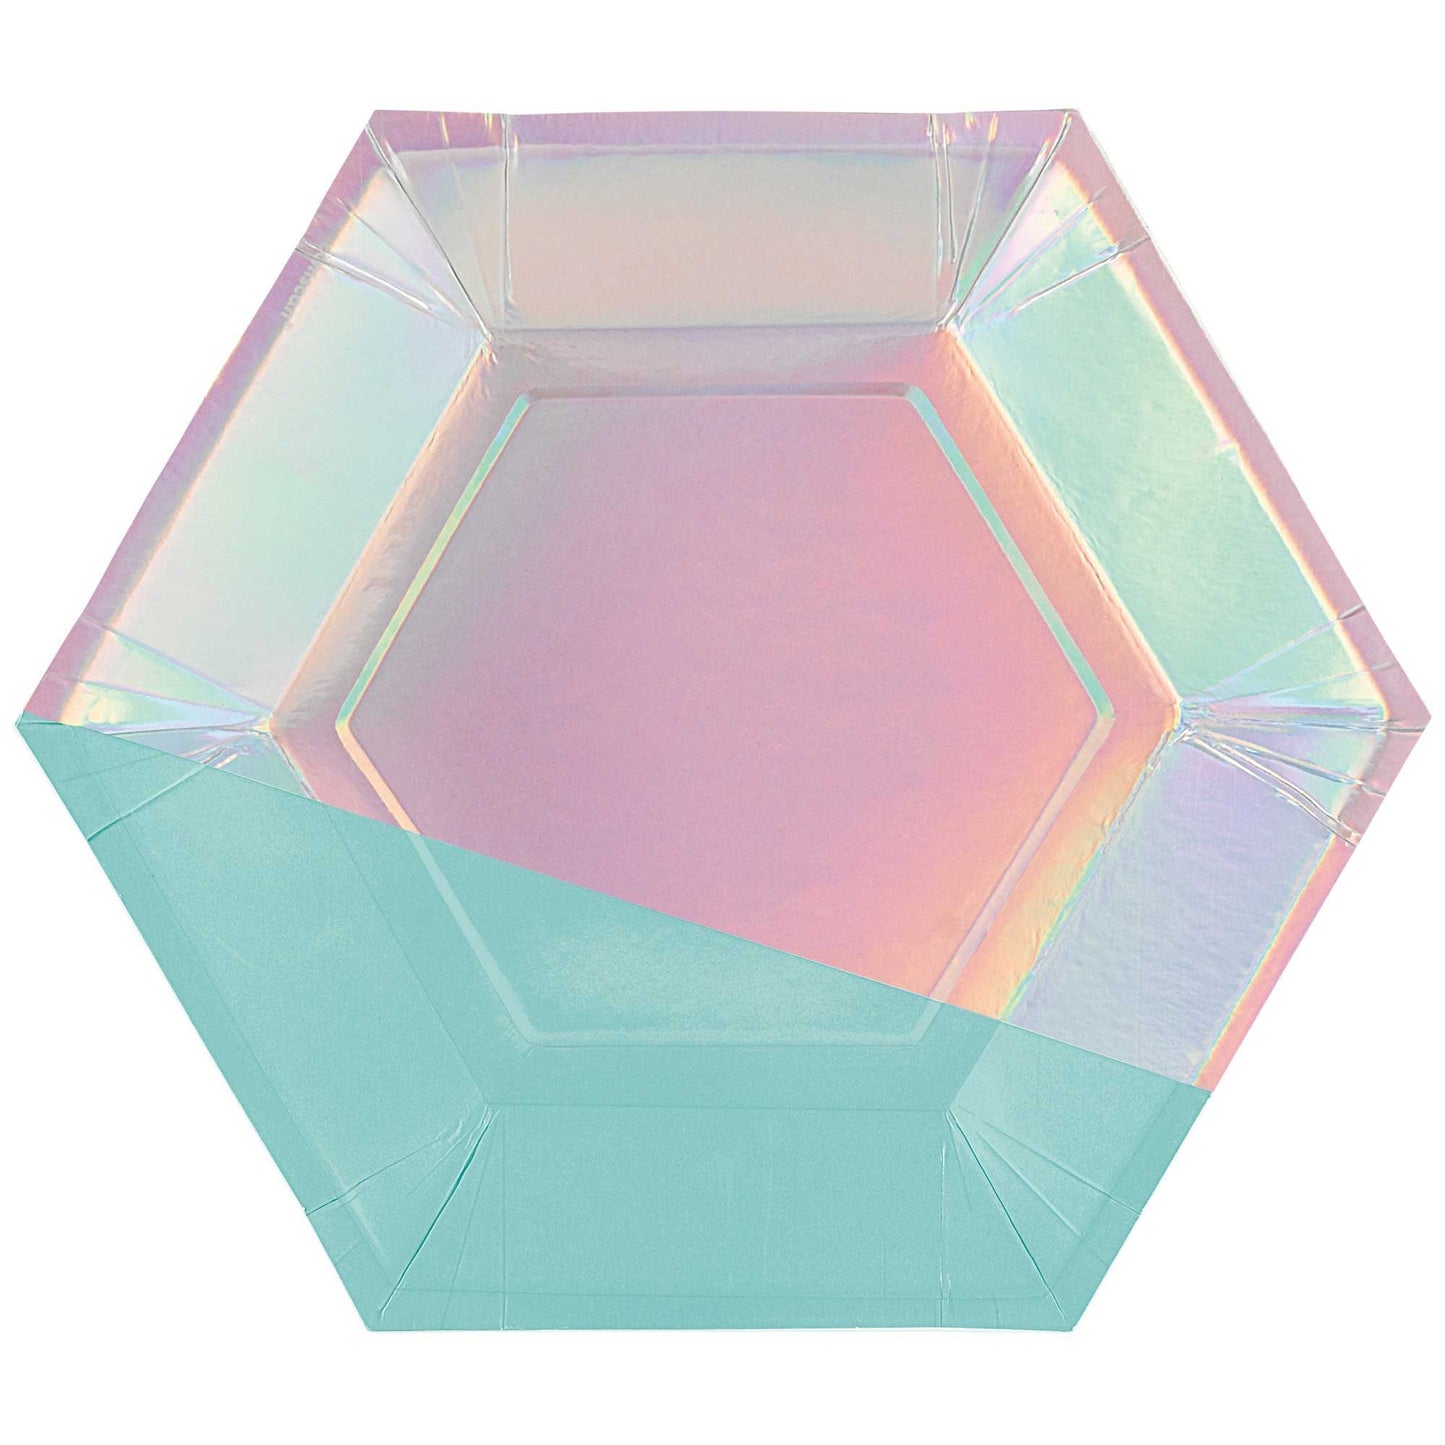 Shimmering Party 23cm Iridescent Hexagonal Paper Plates